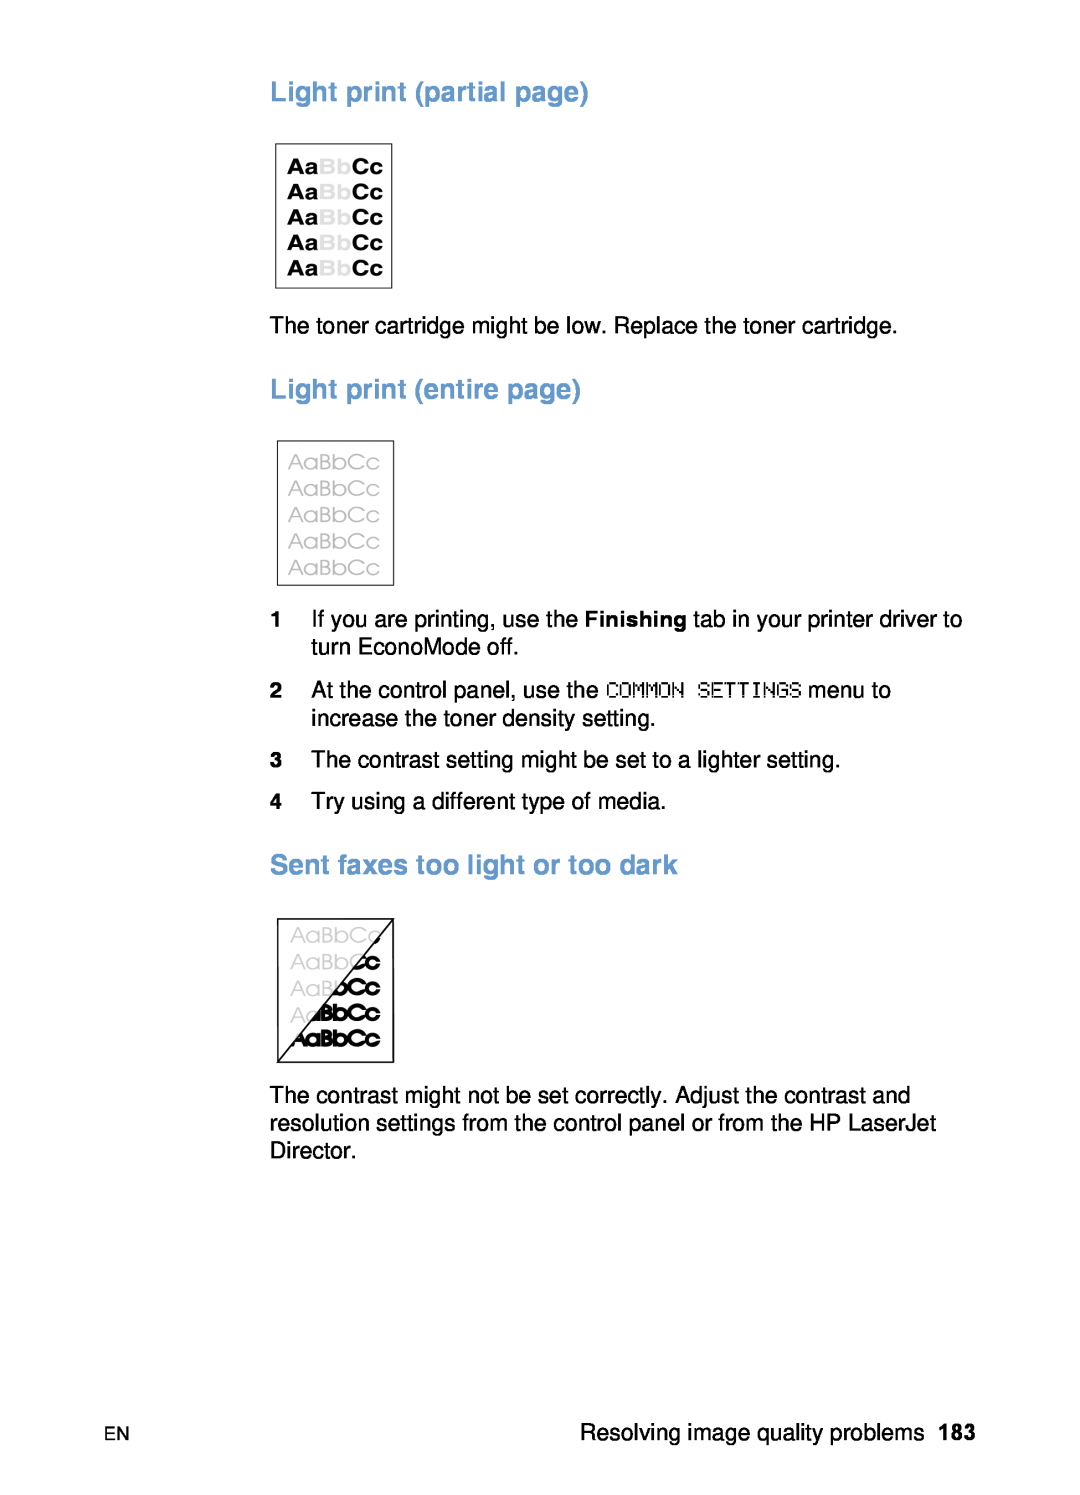 HP 3200 manual Light print partial page, Light print entire page, Sent faxes too light or too dark 